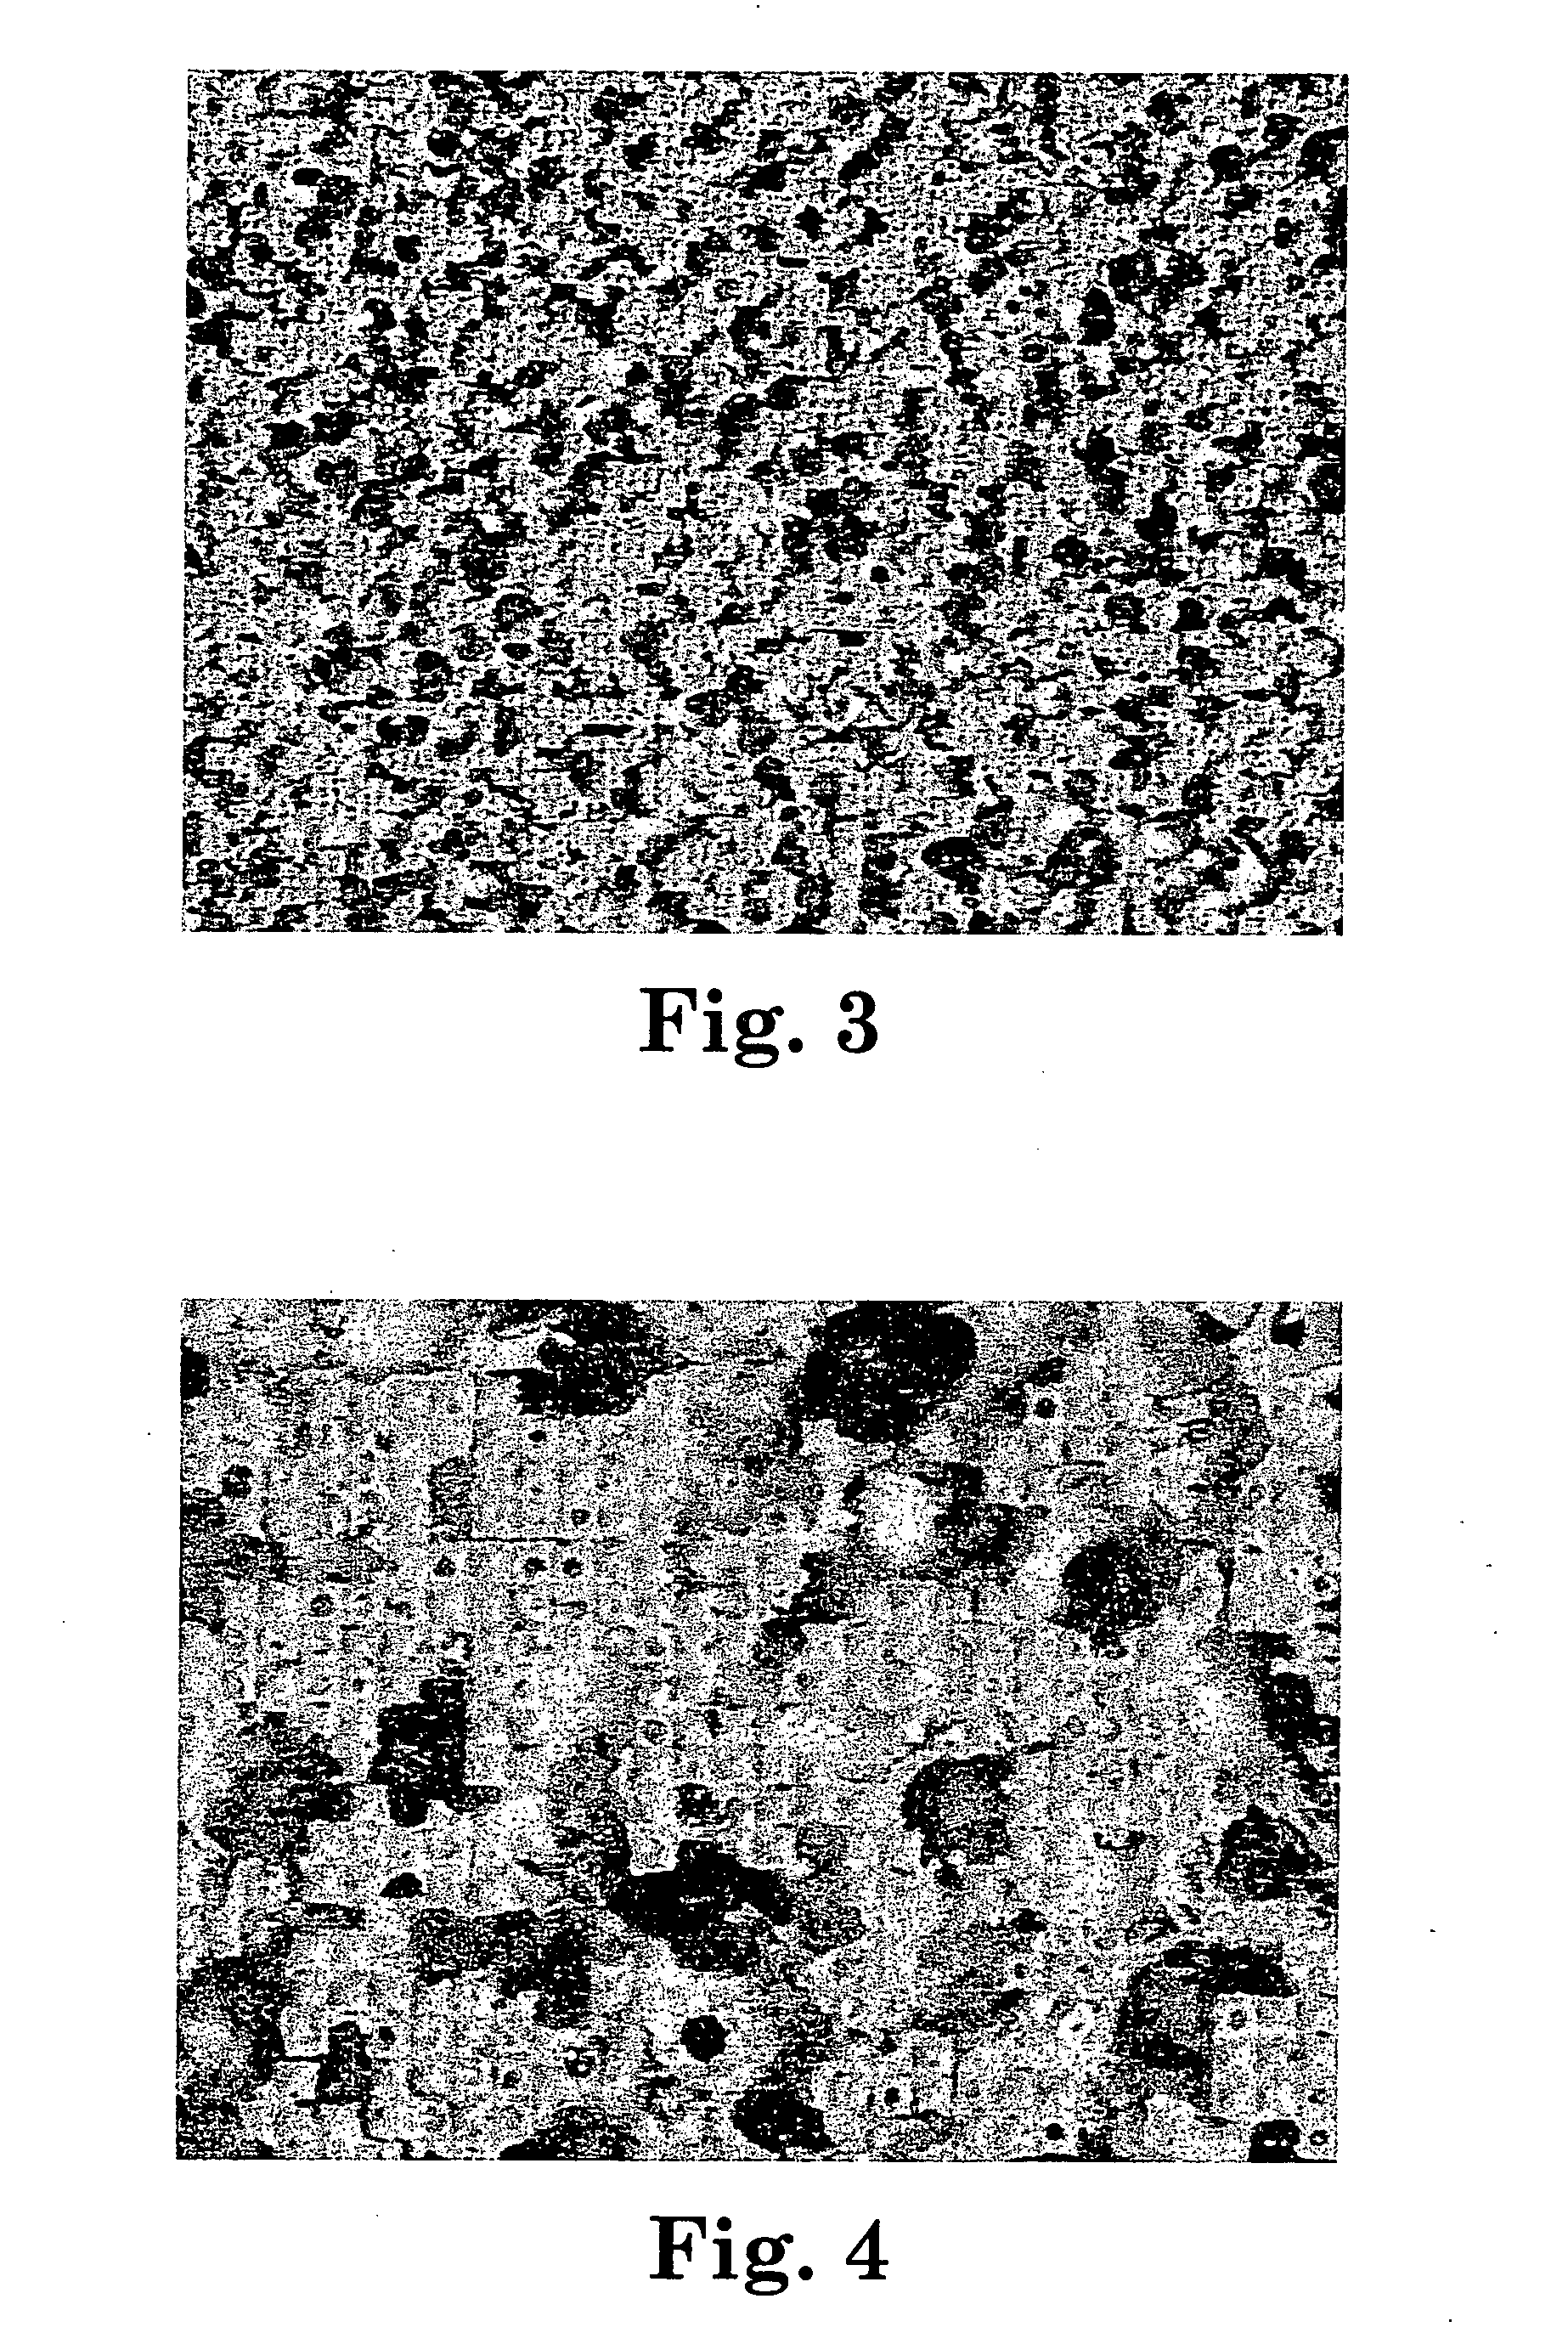 Flexible abrasive product and method of making and using the same